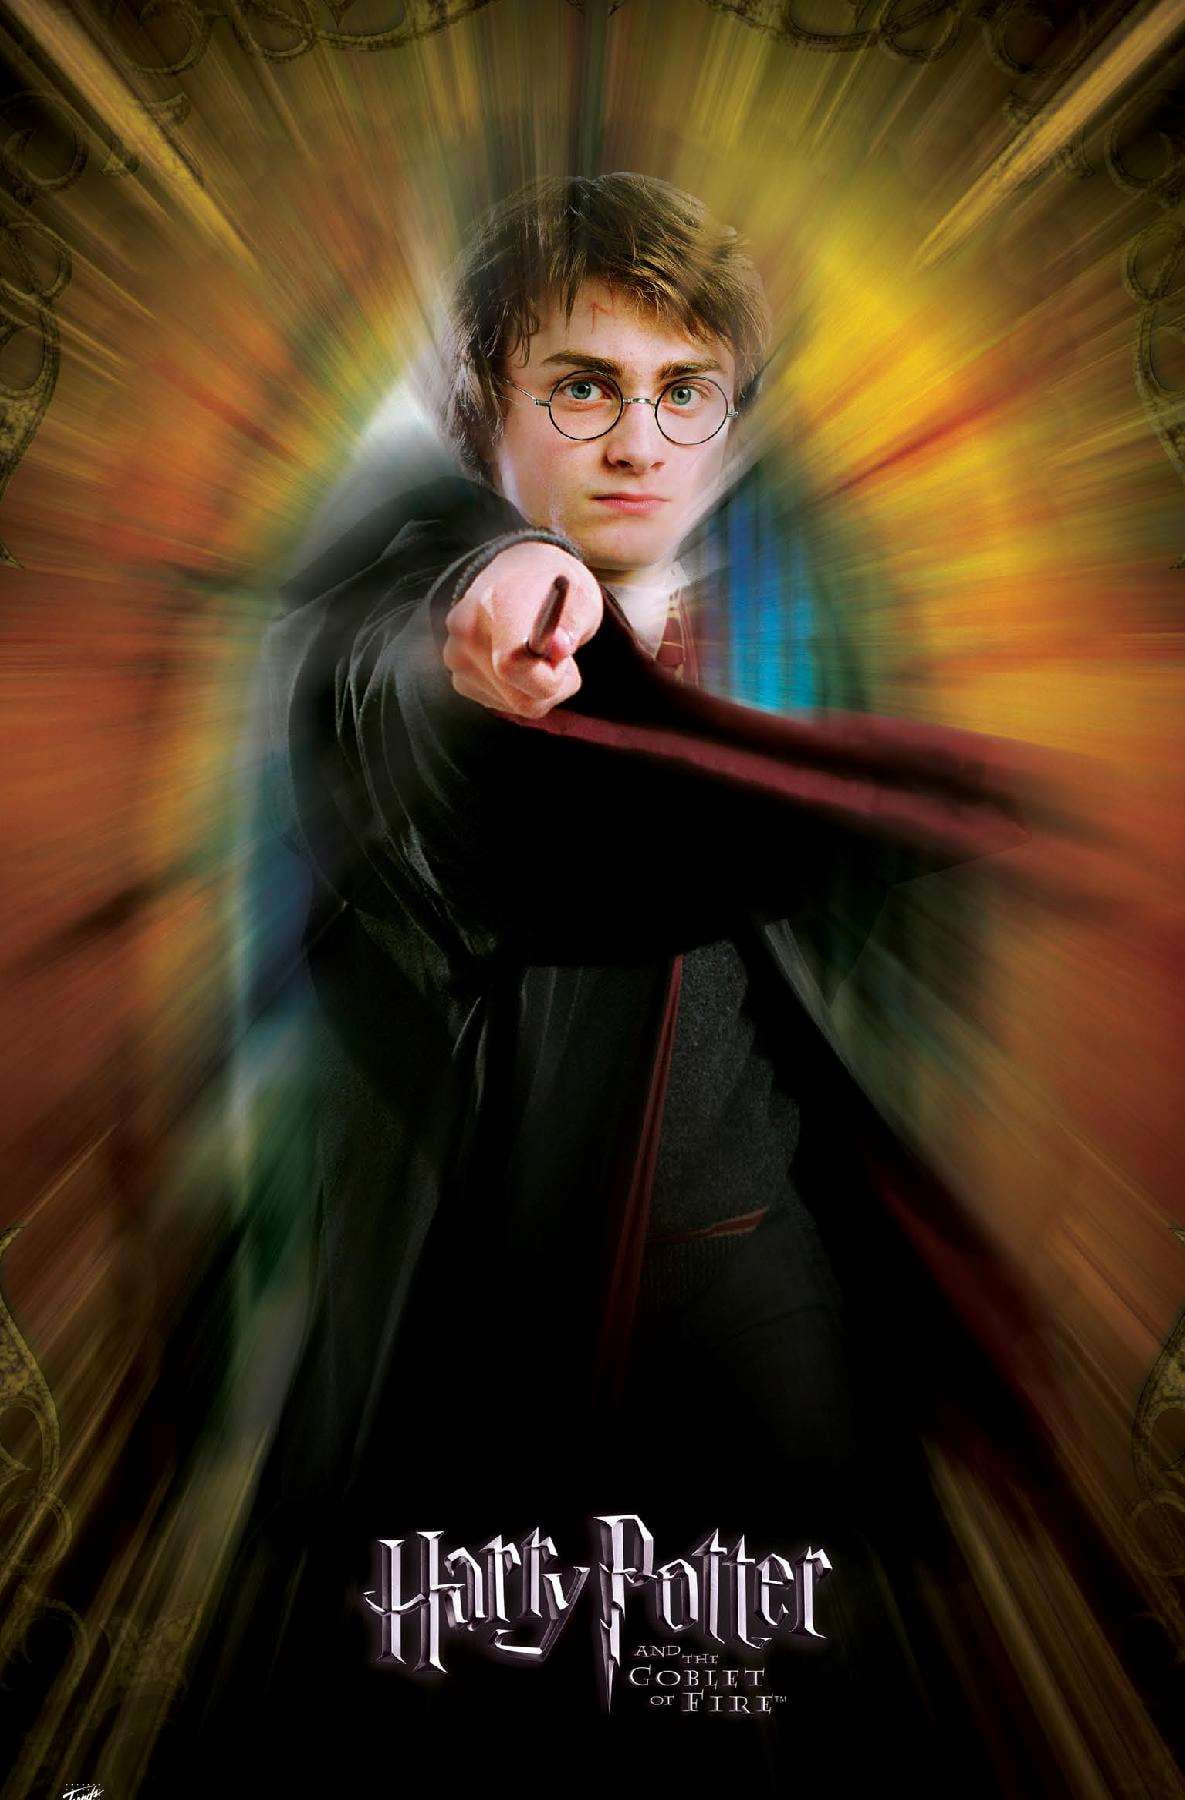 Art Print Poster Harry Potter: Goblet of Fire Movie Film Wall Decor Gift